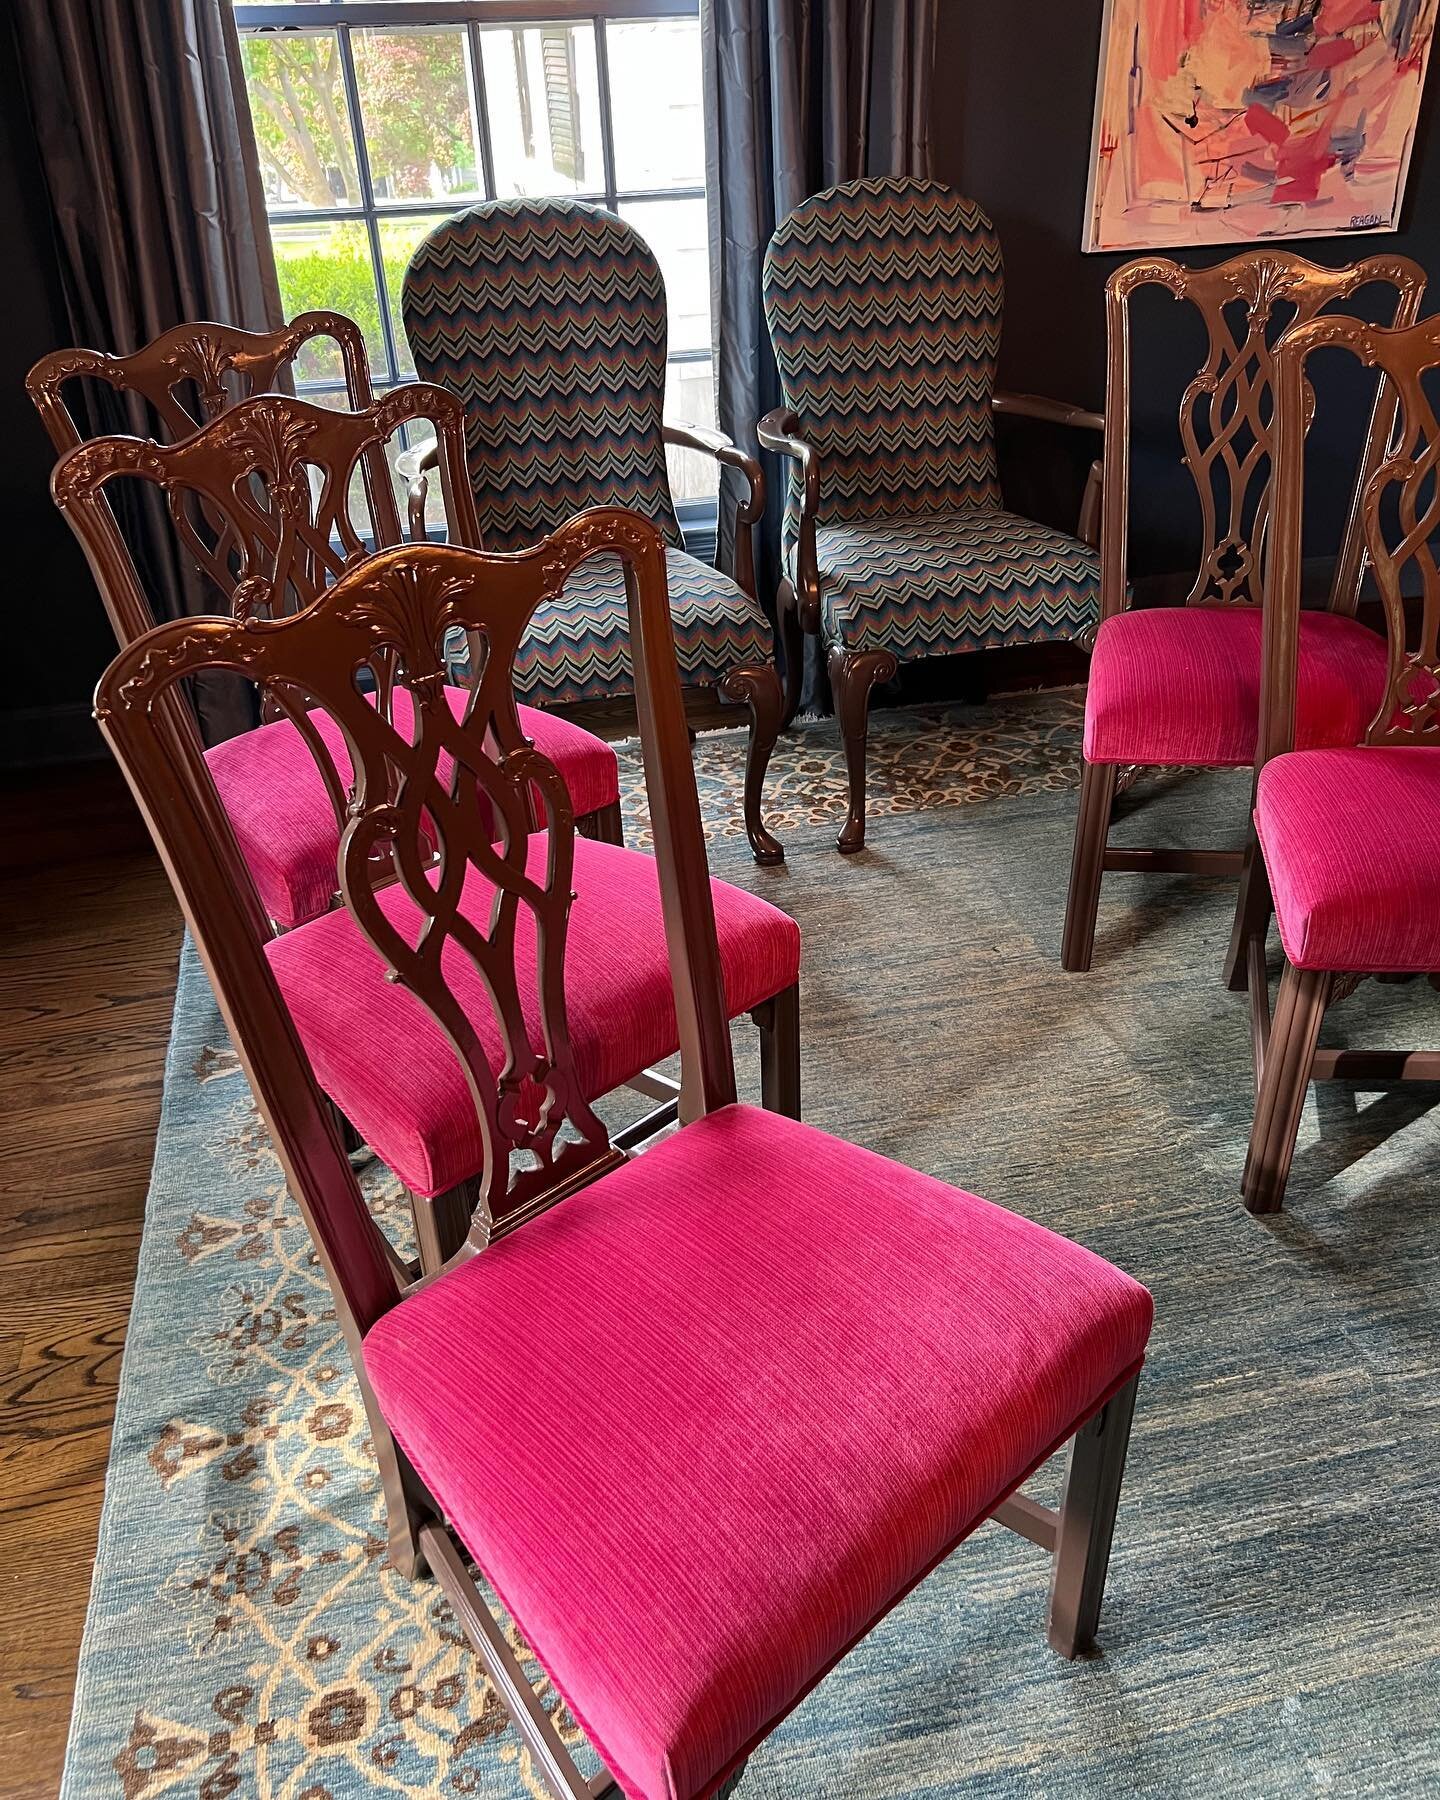 Henredon Dining Chairs Restyled! 8 Painted Chairs with Magenta Upholstered Seats and 2 Newly Upholstered Armchairs #emptyyournest #henredon #diningchairs #diningroom #popofcolor #diningroomdecor #diningroominspo #interiordesign #interiordesigner #hom